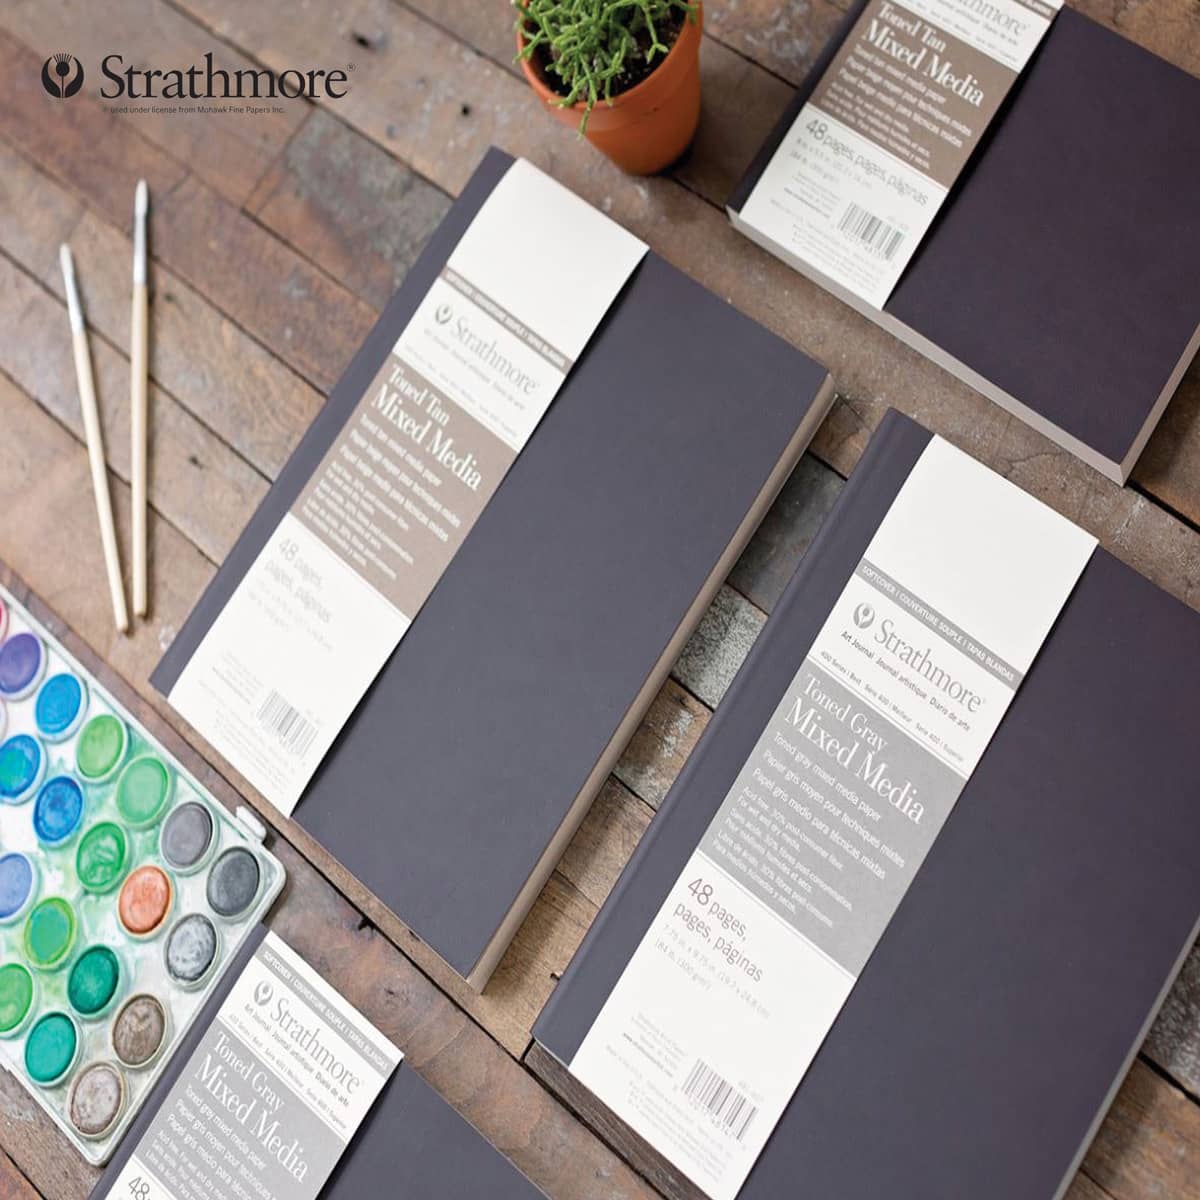 Strathmore 400 Series Toned Gray Sketch Pads – K. A. Artist Shop